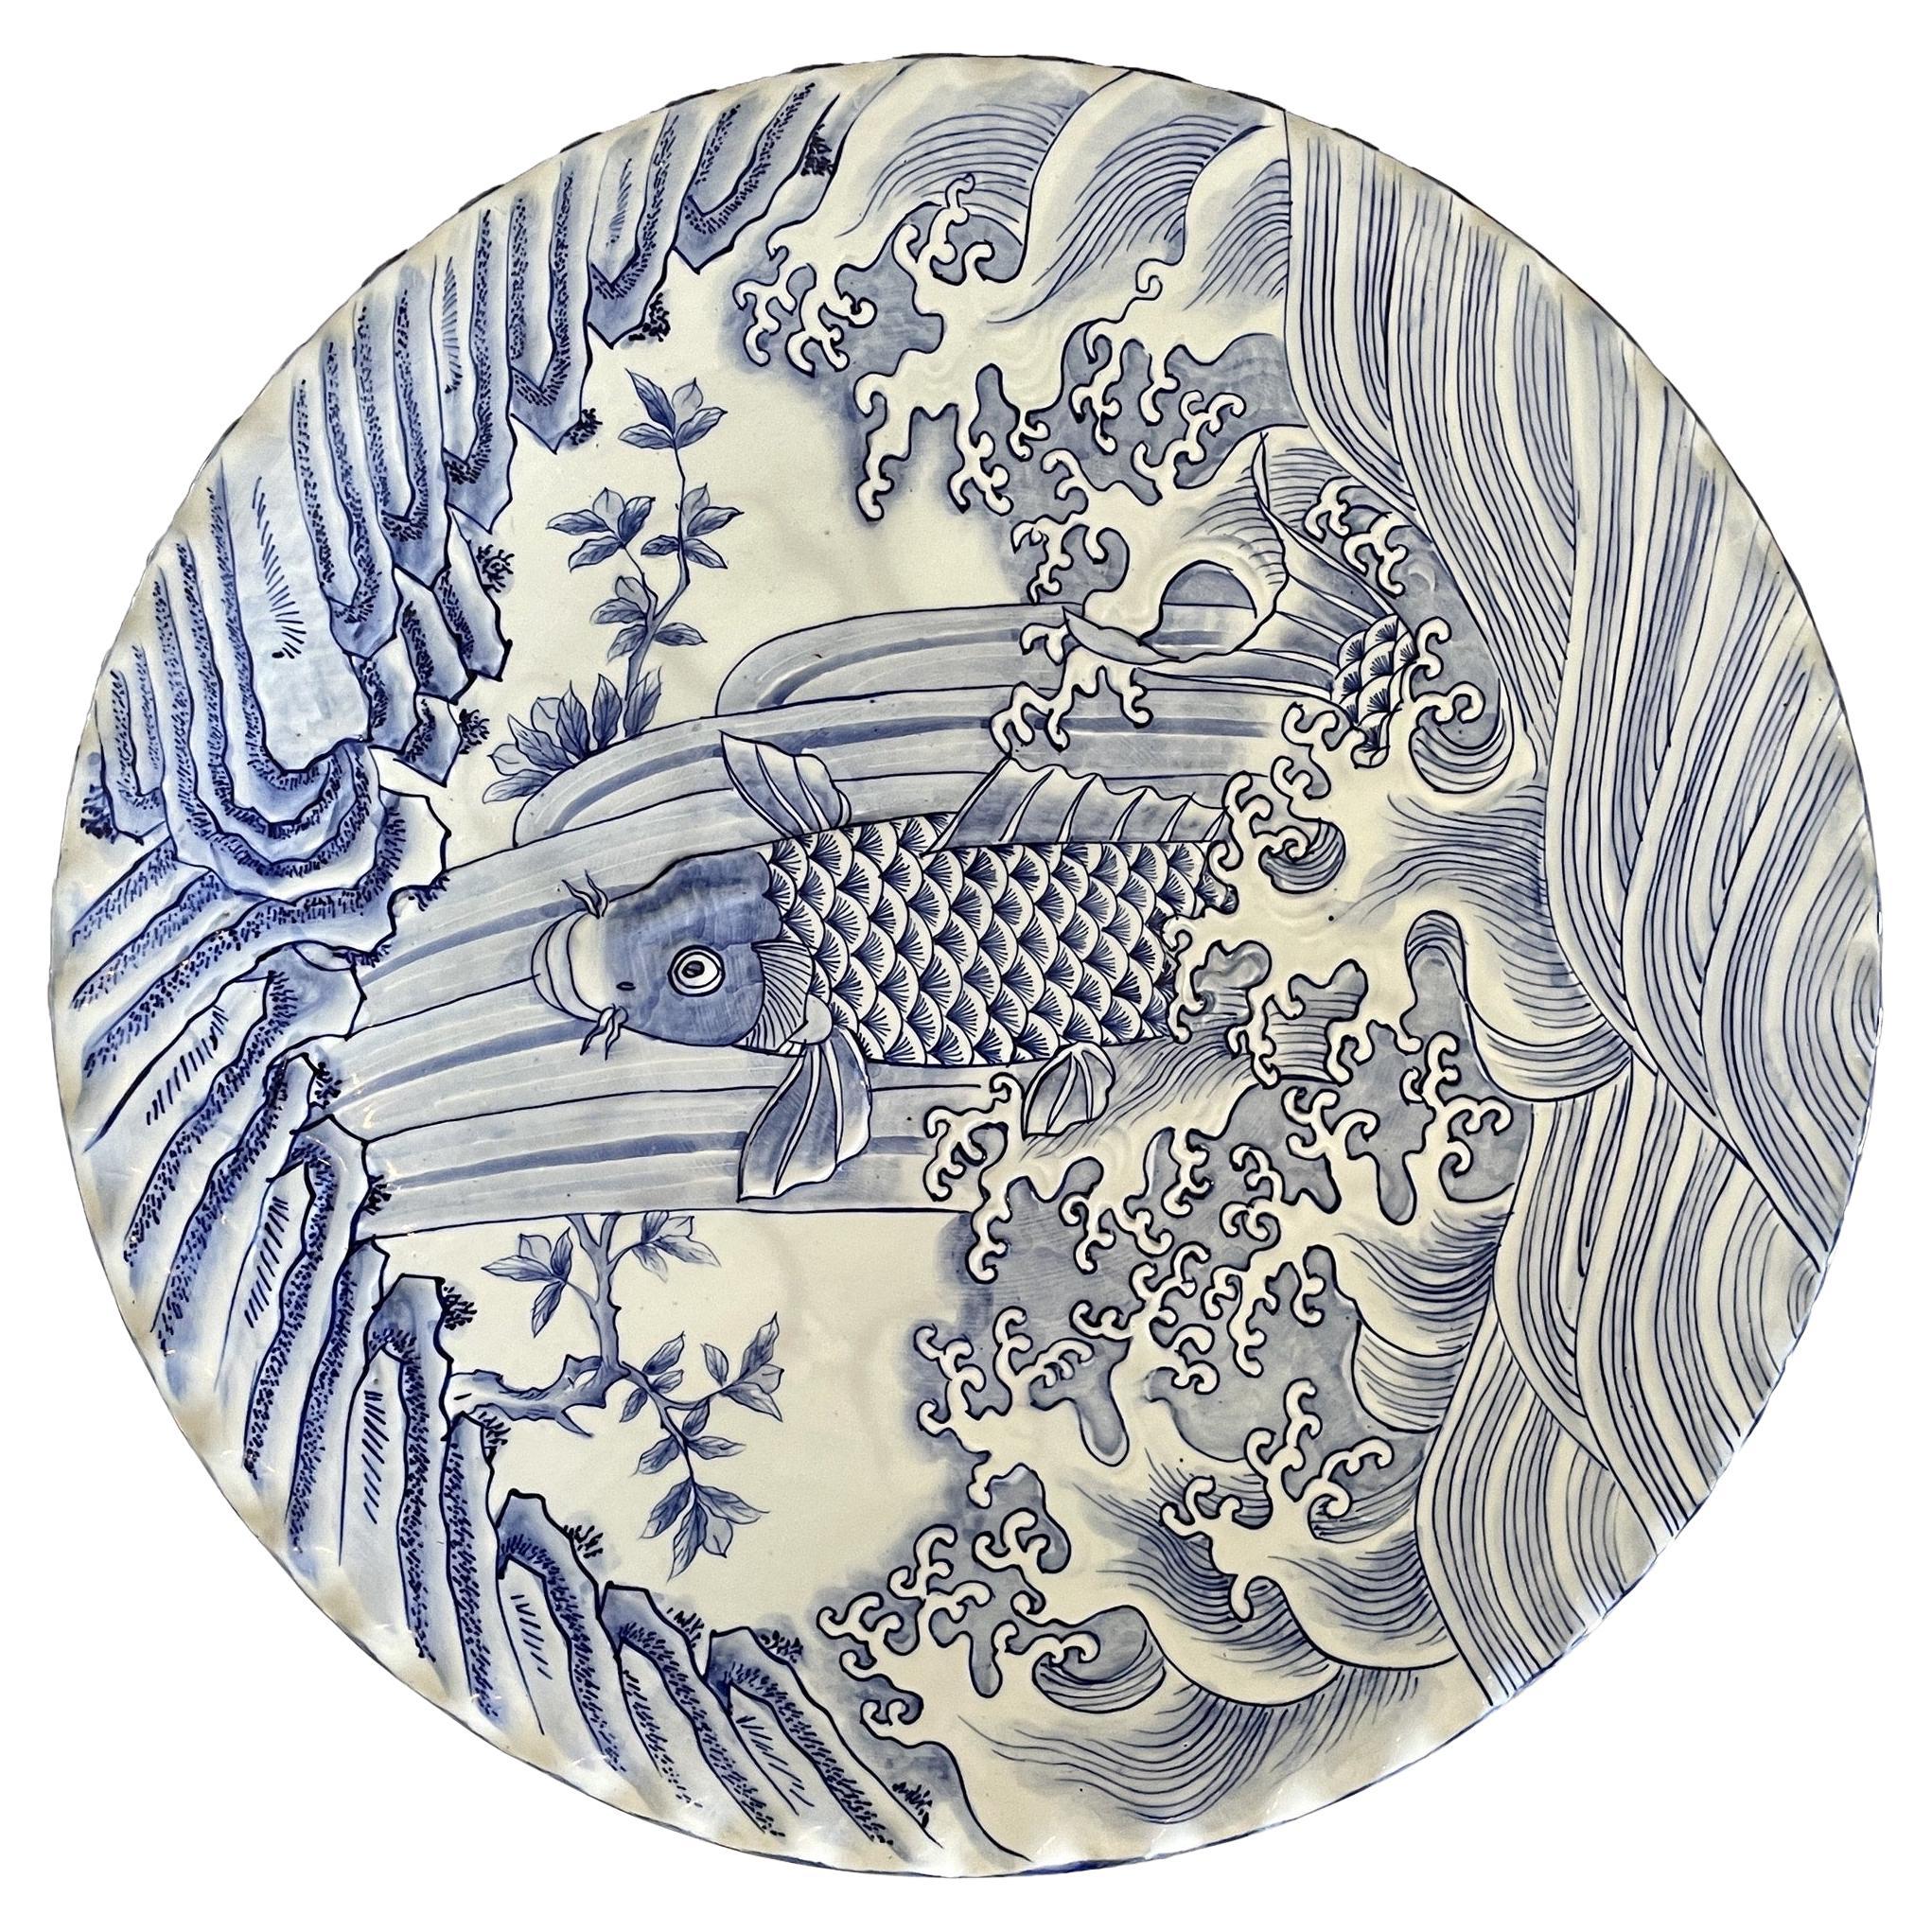 Large Japanese Decorative Blue and White Serving Platter